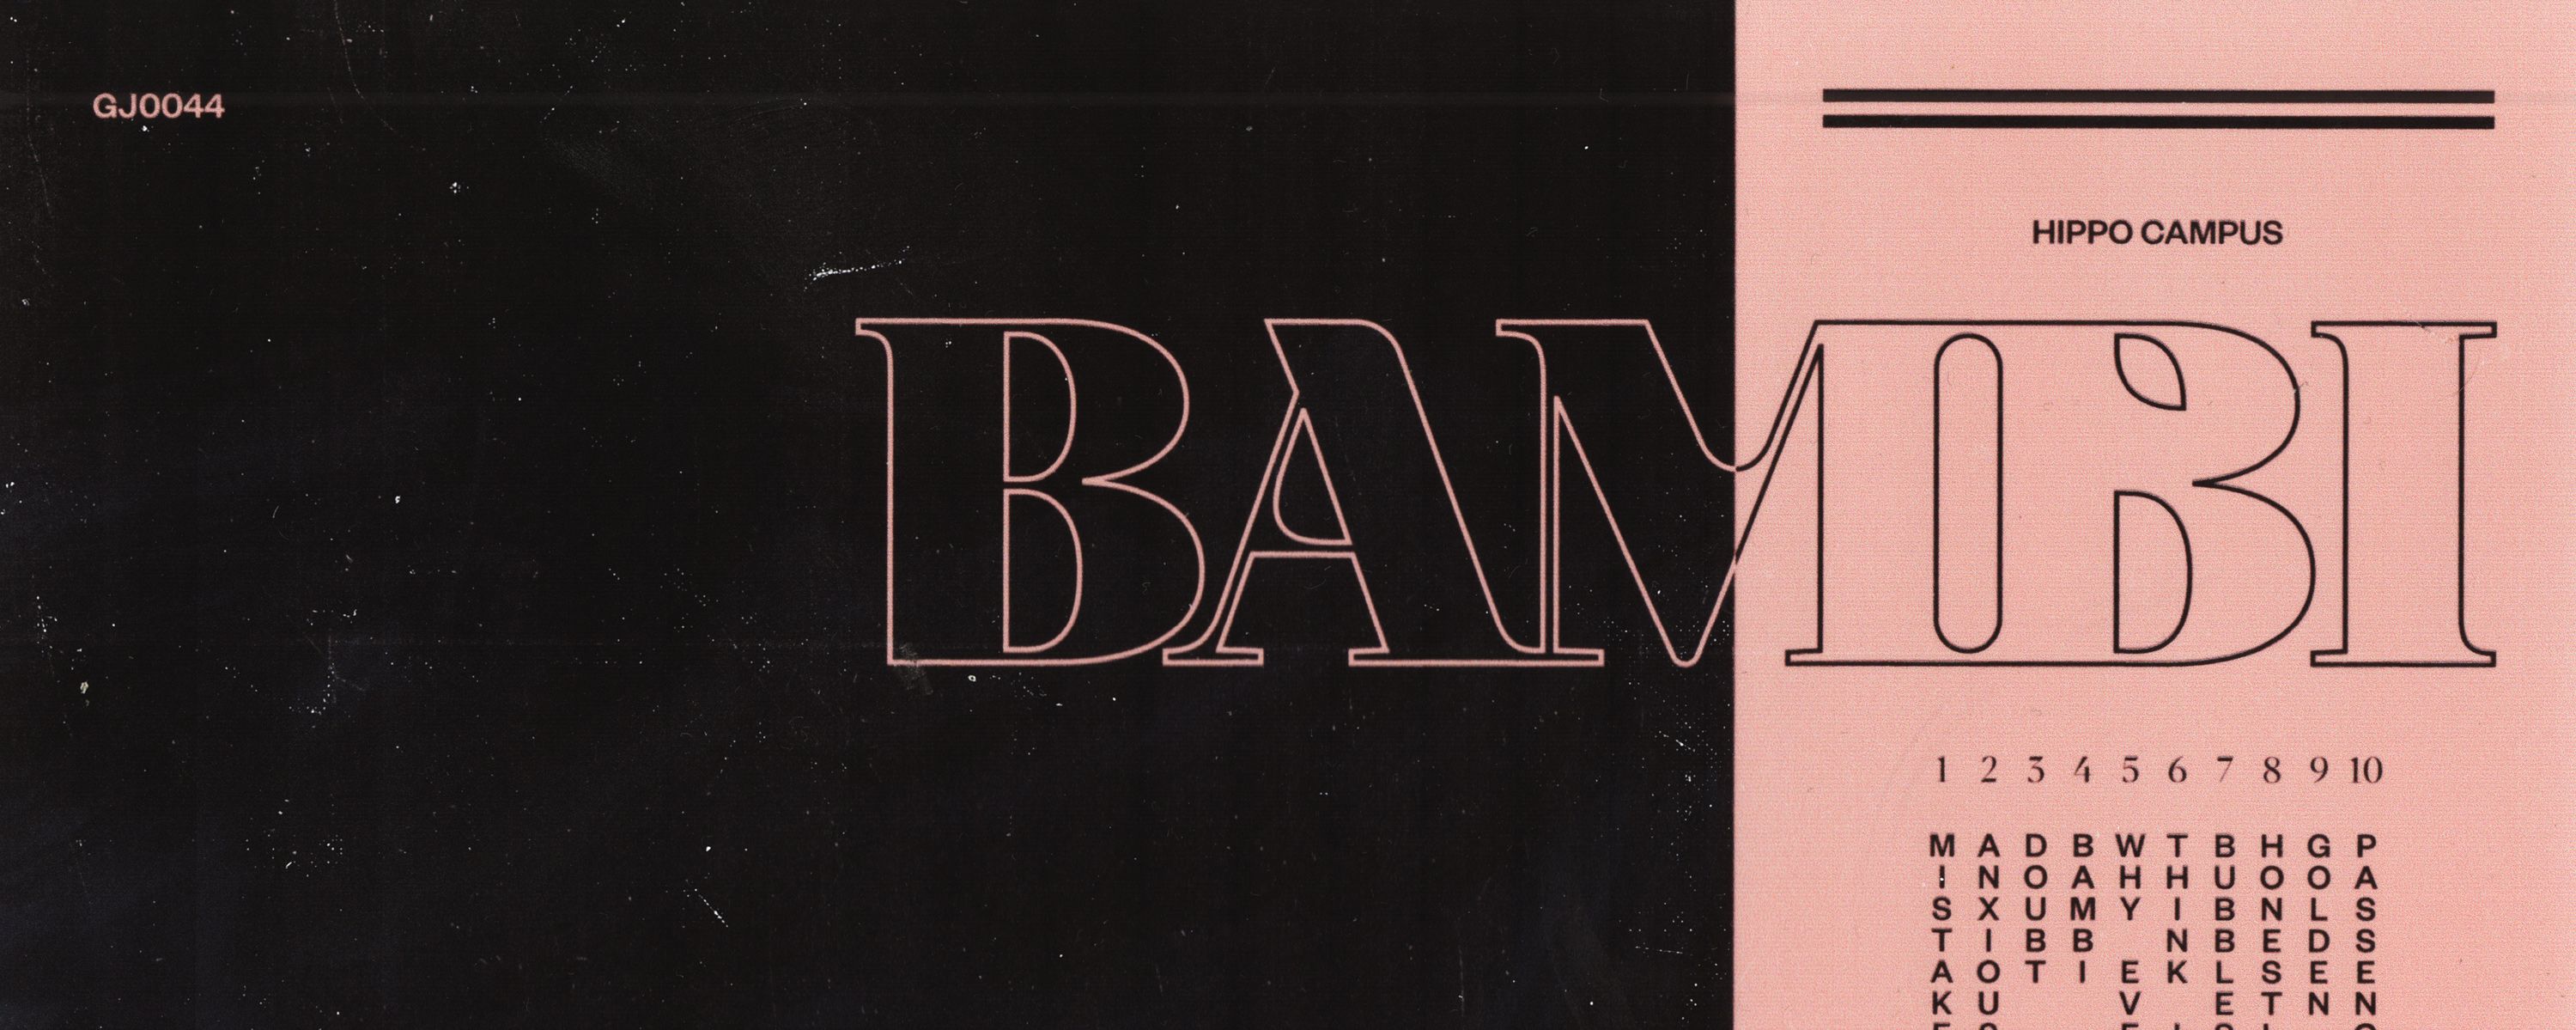 Hippo Campus delivers new sound with sophomore album ‘Bambi’